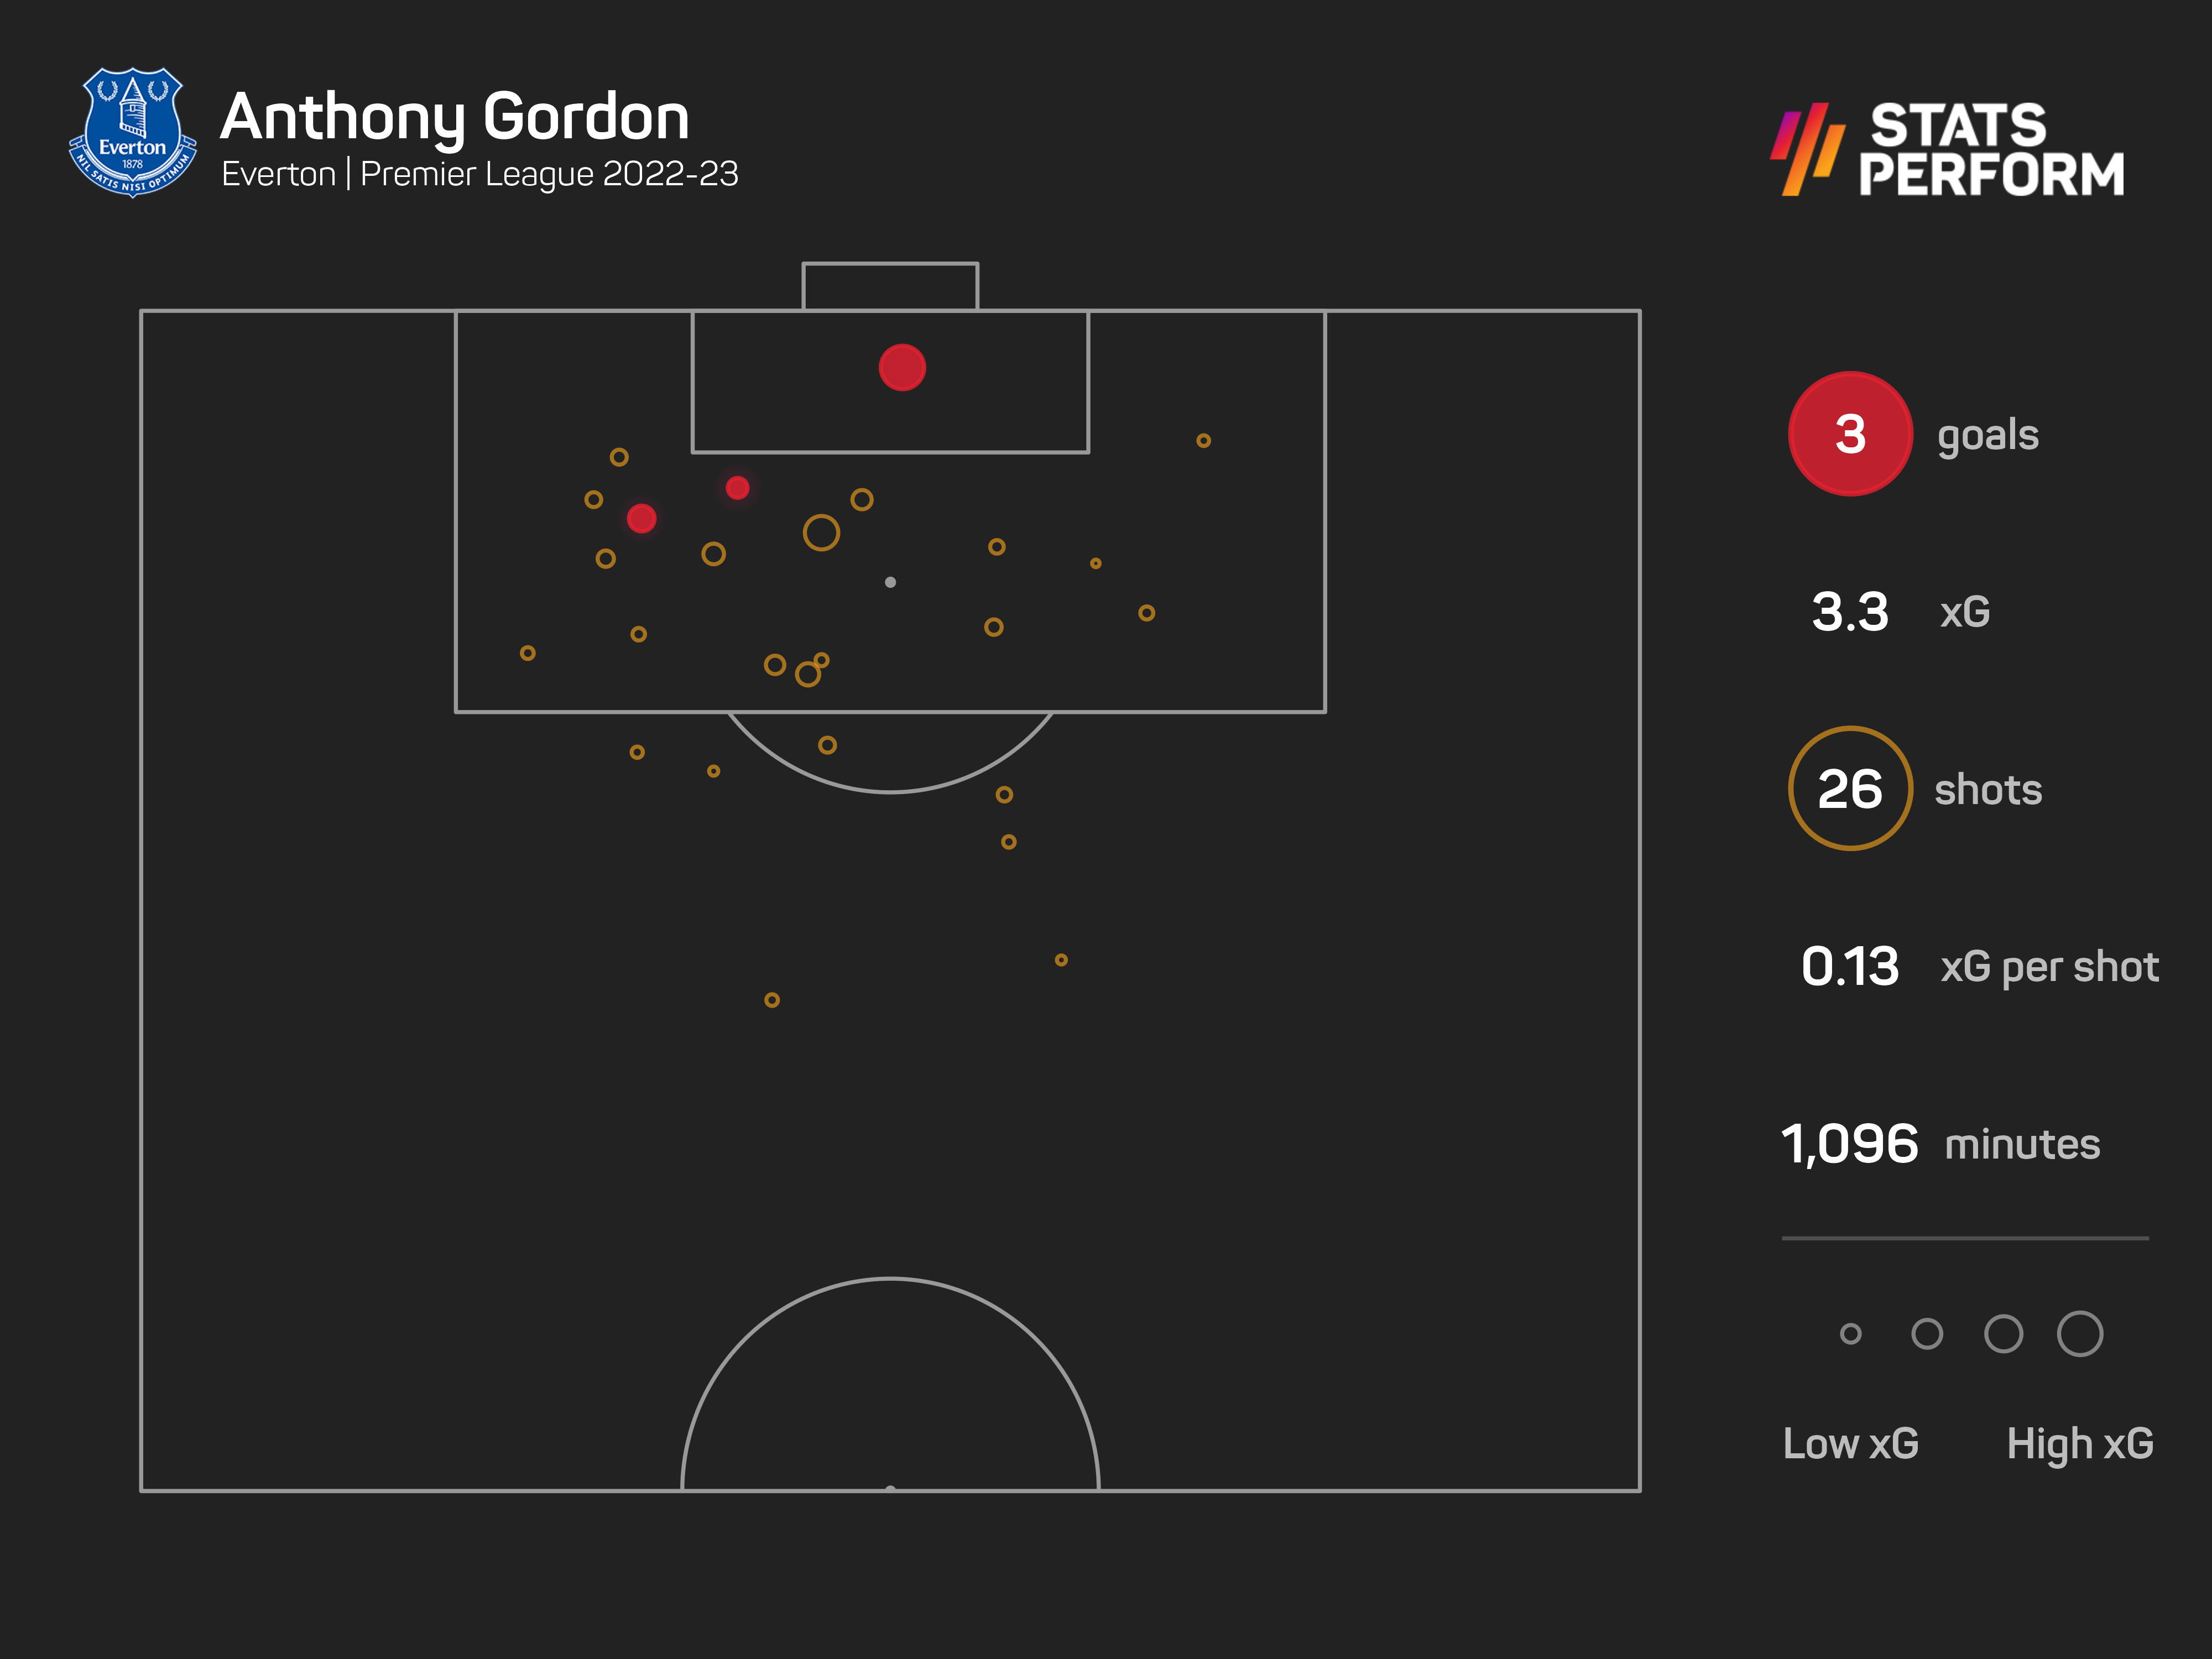 Anthony Gordon will provide another attacking option for Eddie Howe